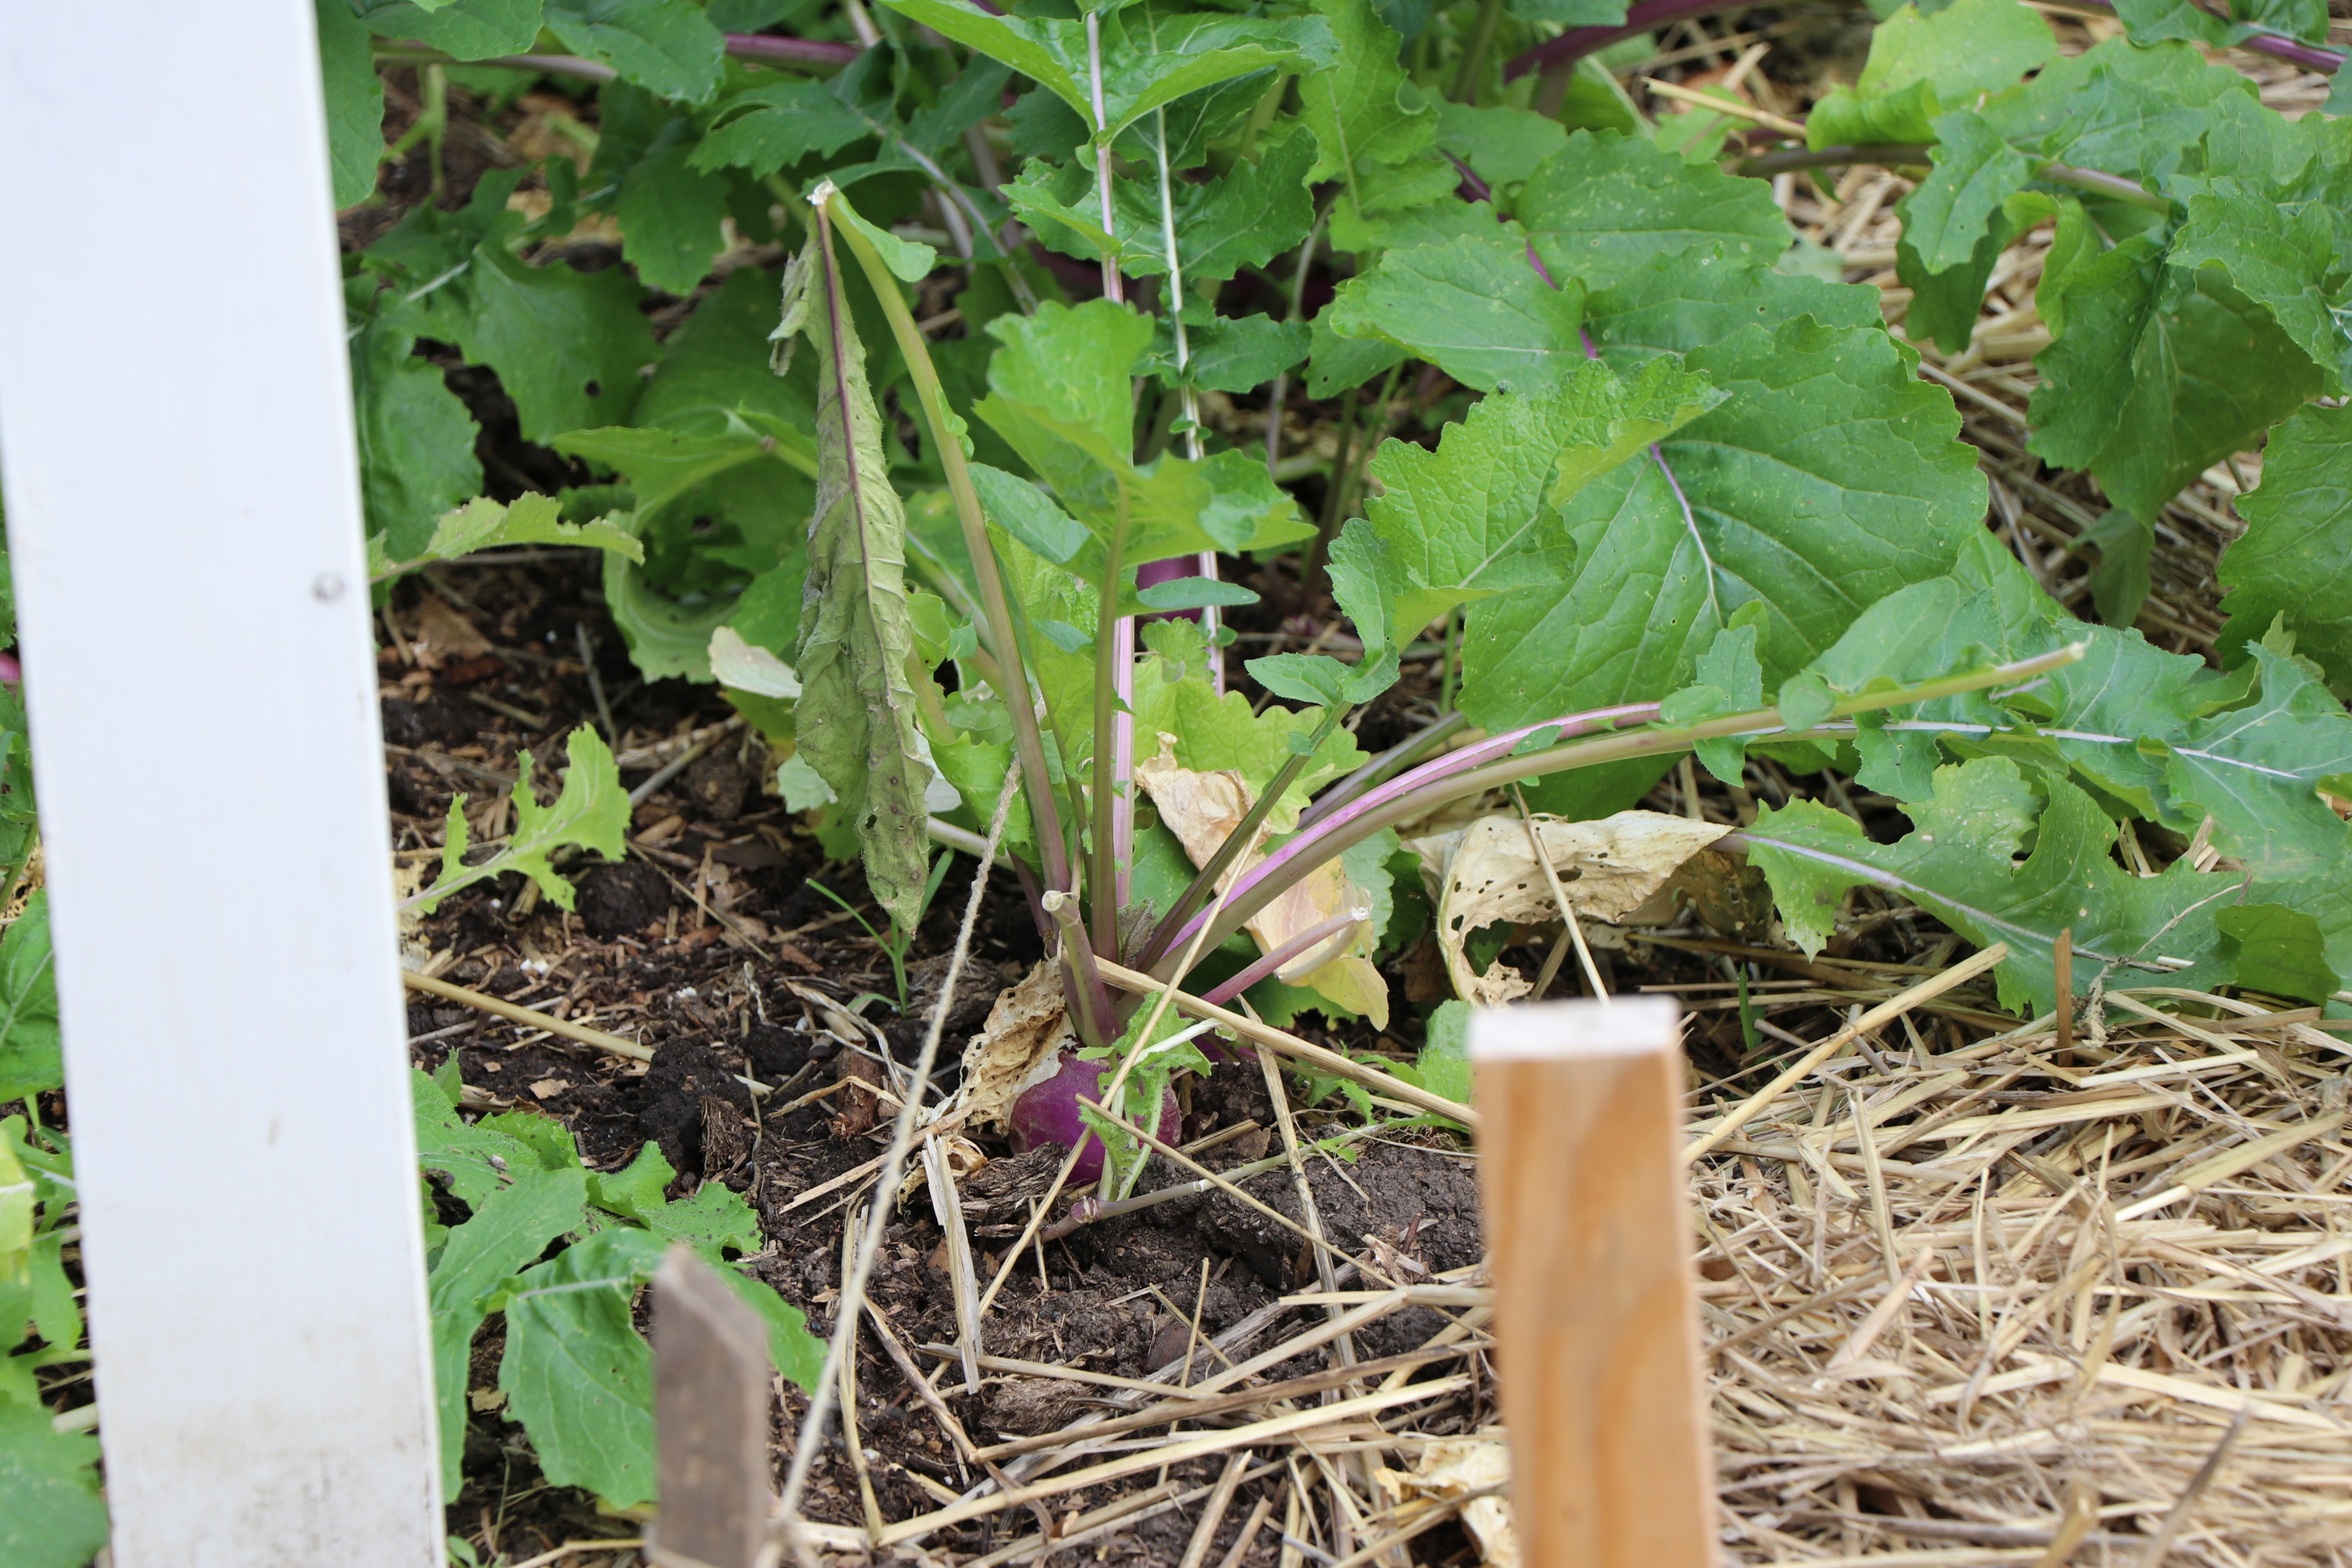 A purple turnip sticking out of the soil.